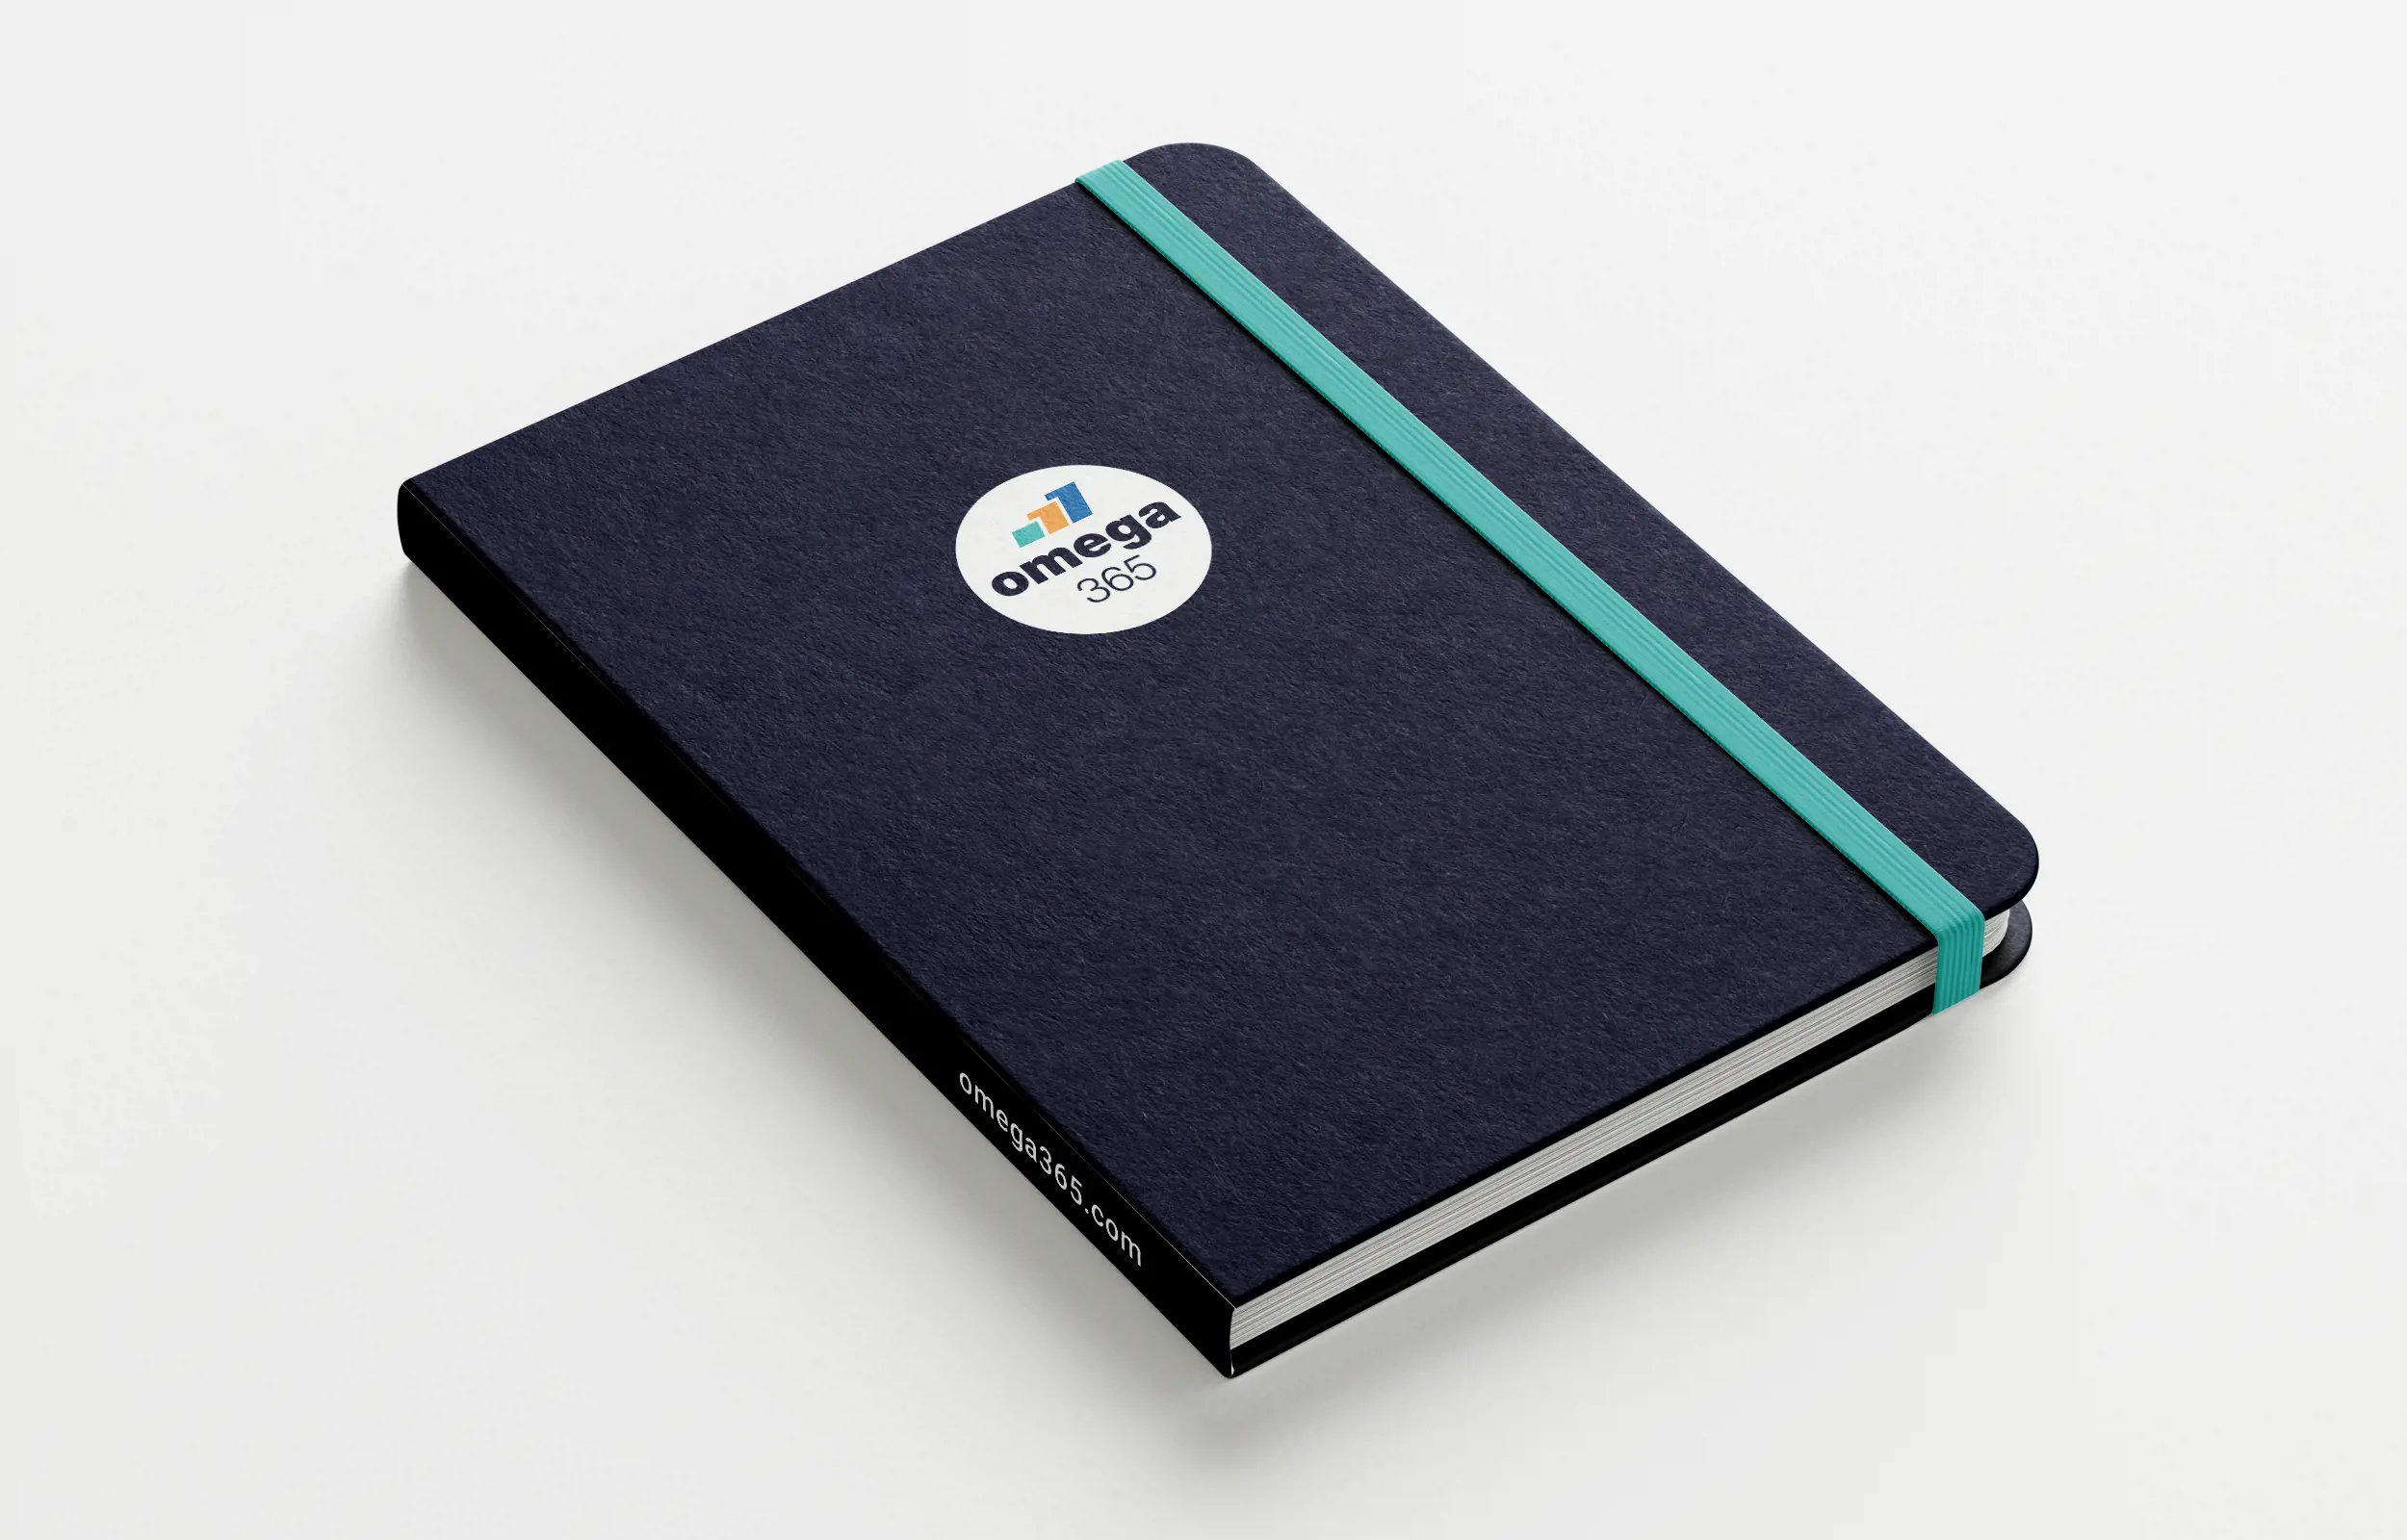 Notebook with Omega 365's logo.